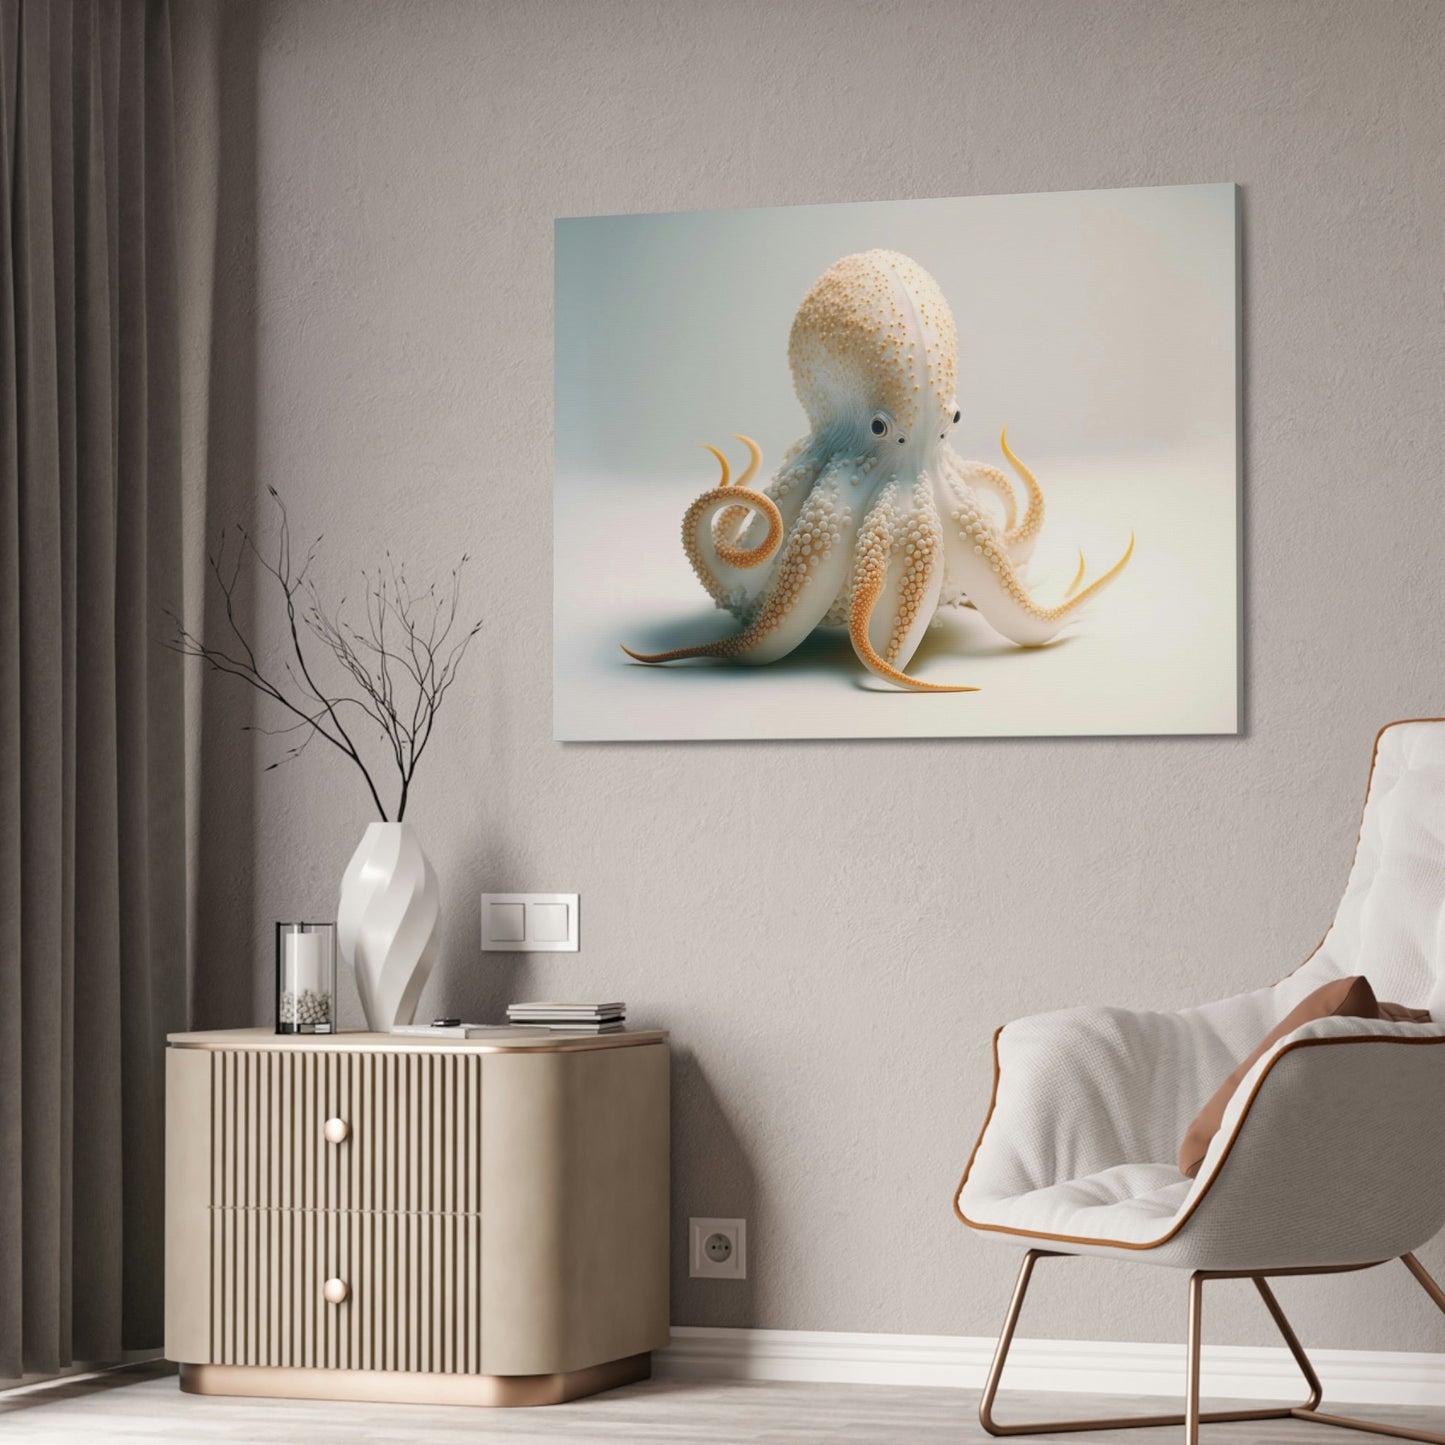 The Wonders of Octopuses: A Detailed and Realistic Canvas